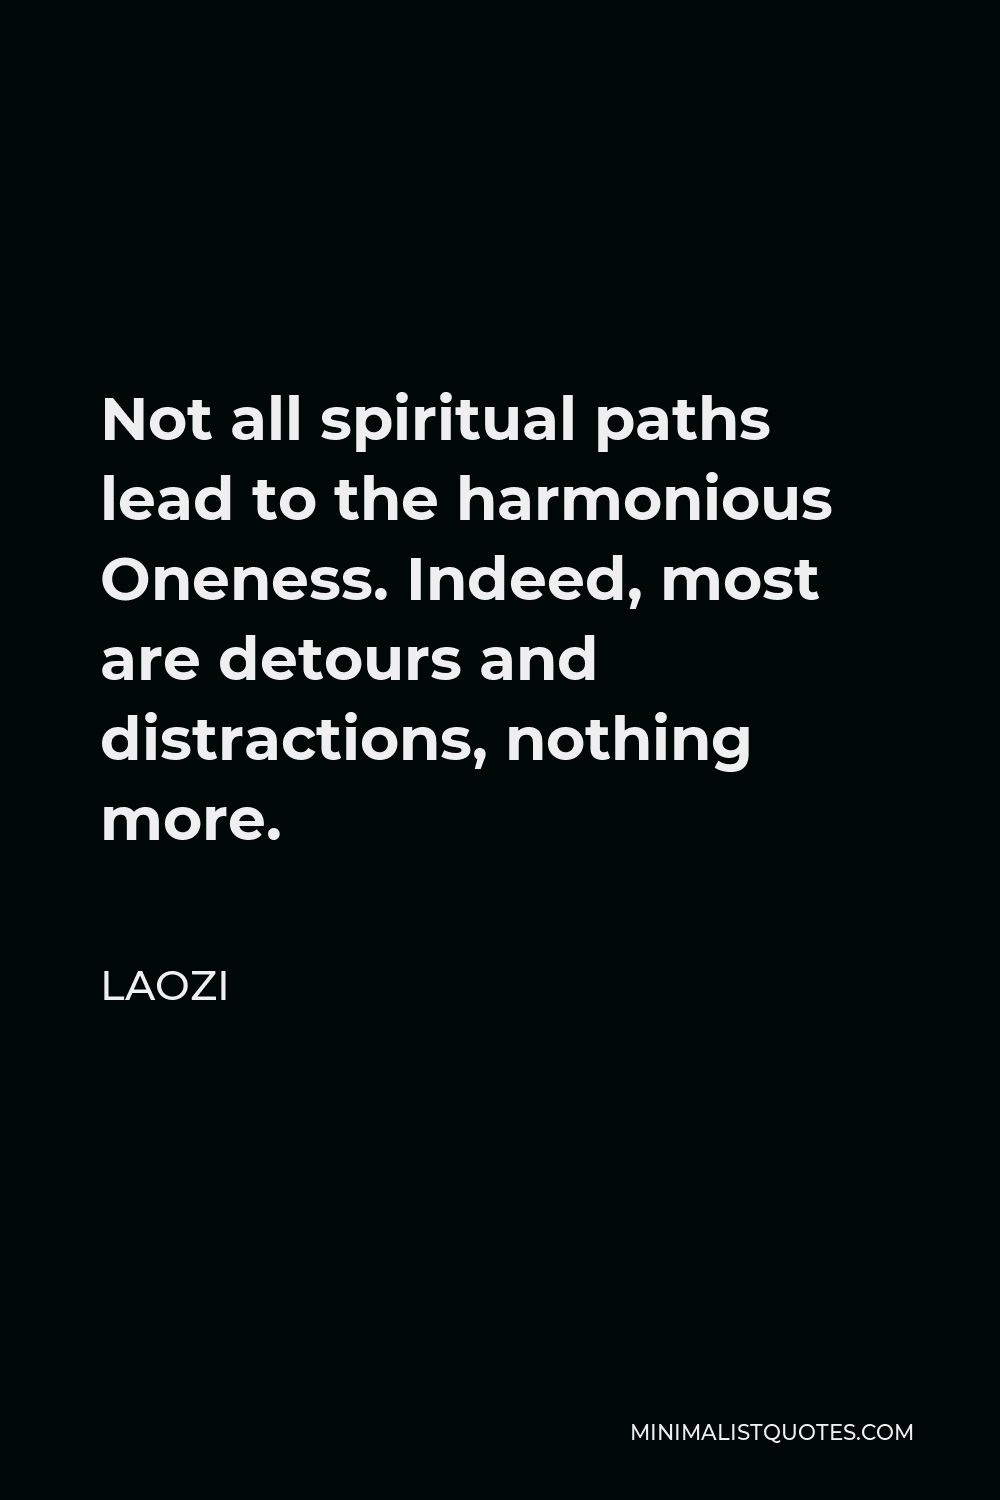 Laozi Quote - Not all spiritual paths lead to the harmonious Oneness. Indeed, most are detours and distractions, nothing more.